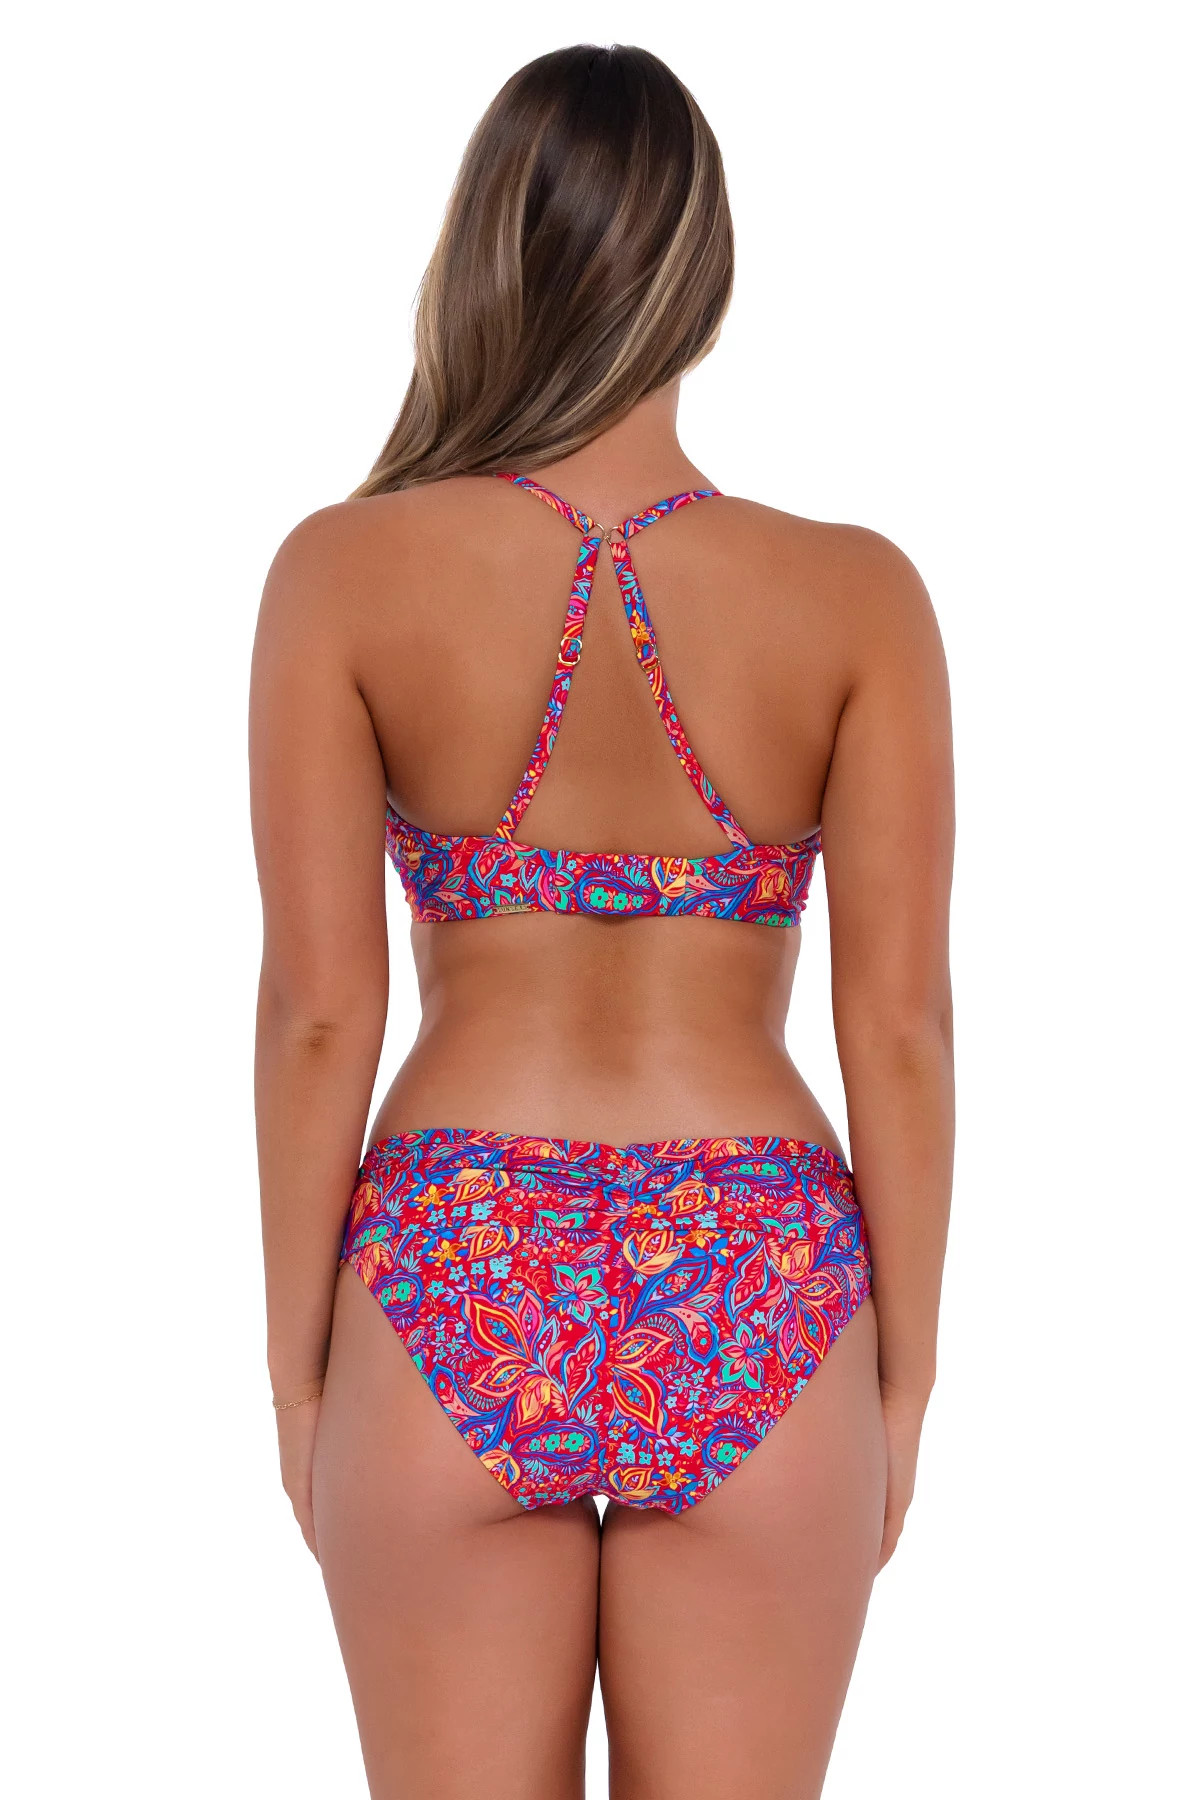 RUE PAISLEY Crossroads Underwire Bikini Top (D+ Cup) image number 3